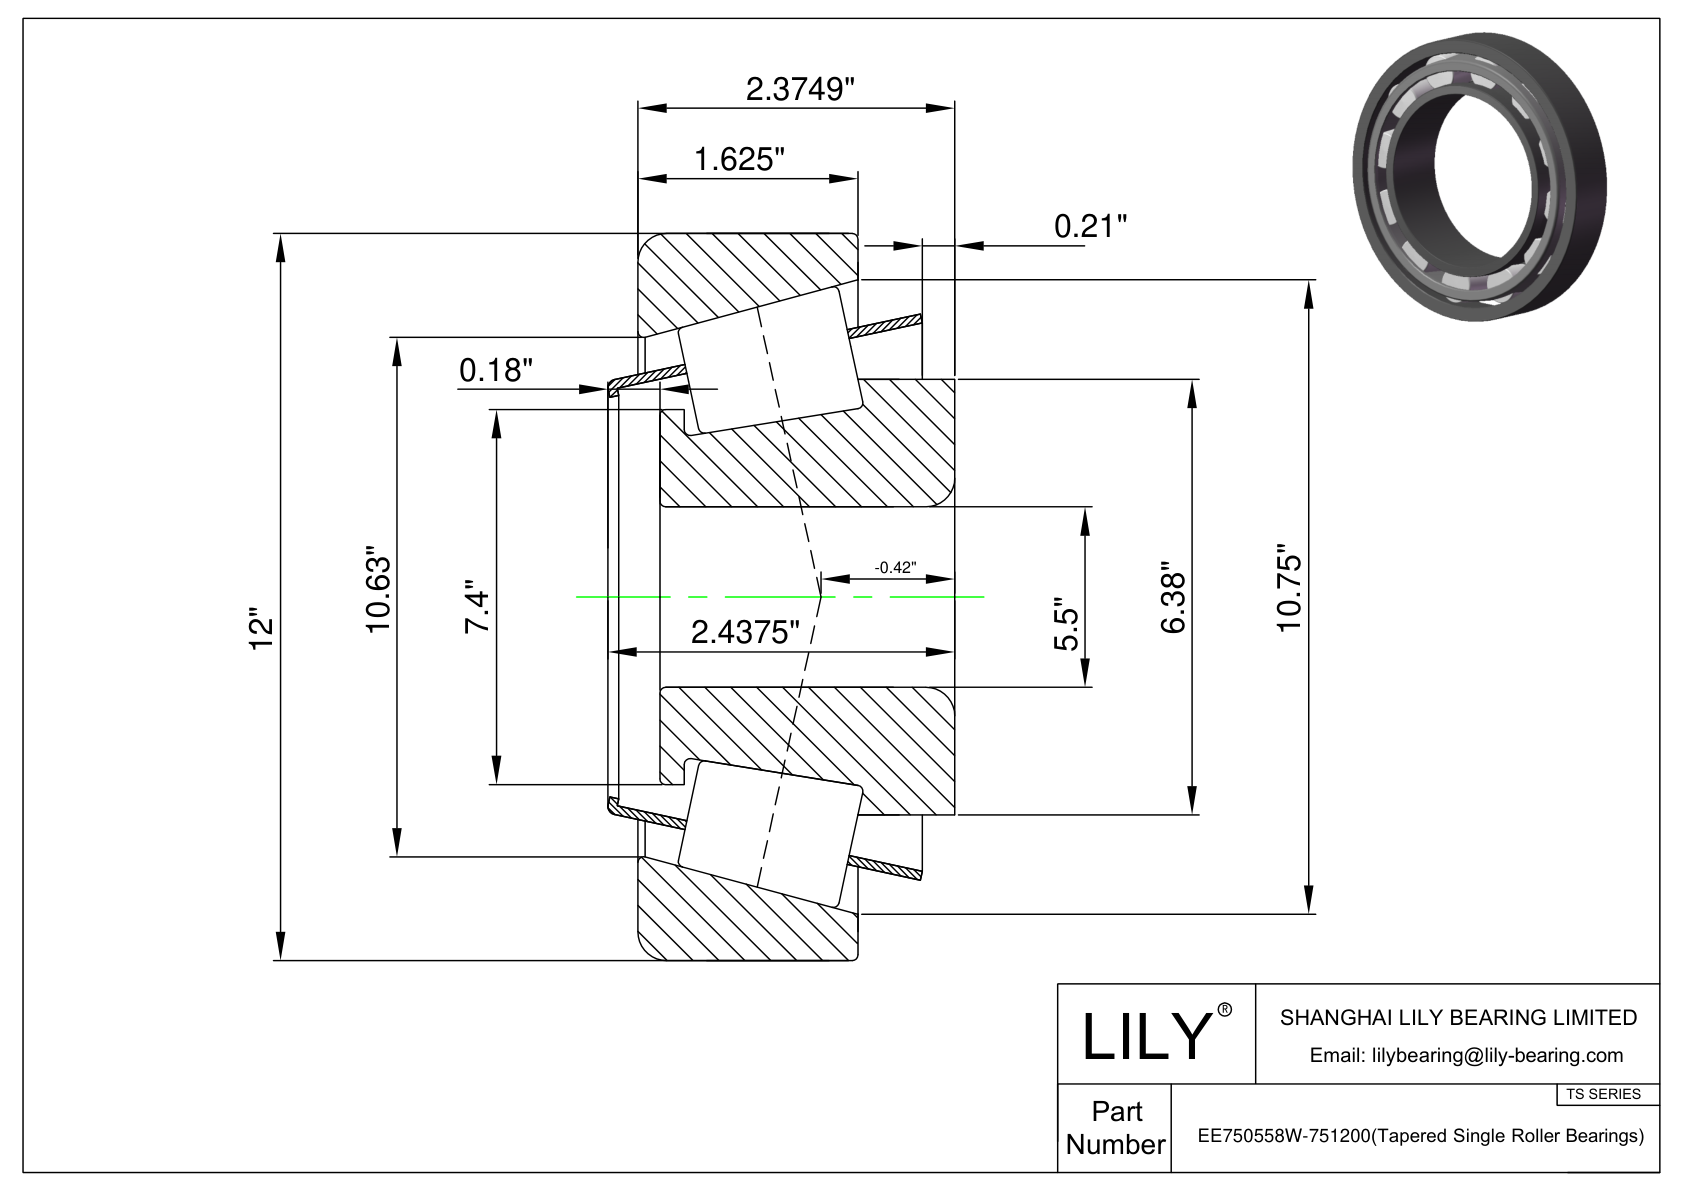 EE750558W-751200 TS (Tapered Single Roller Bearings) (Imperial) cad drawing